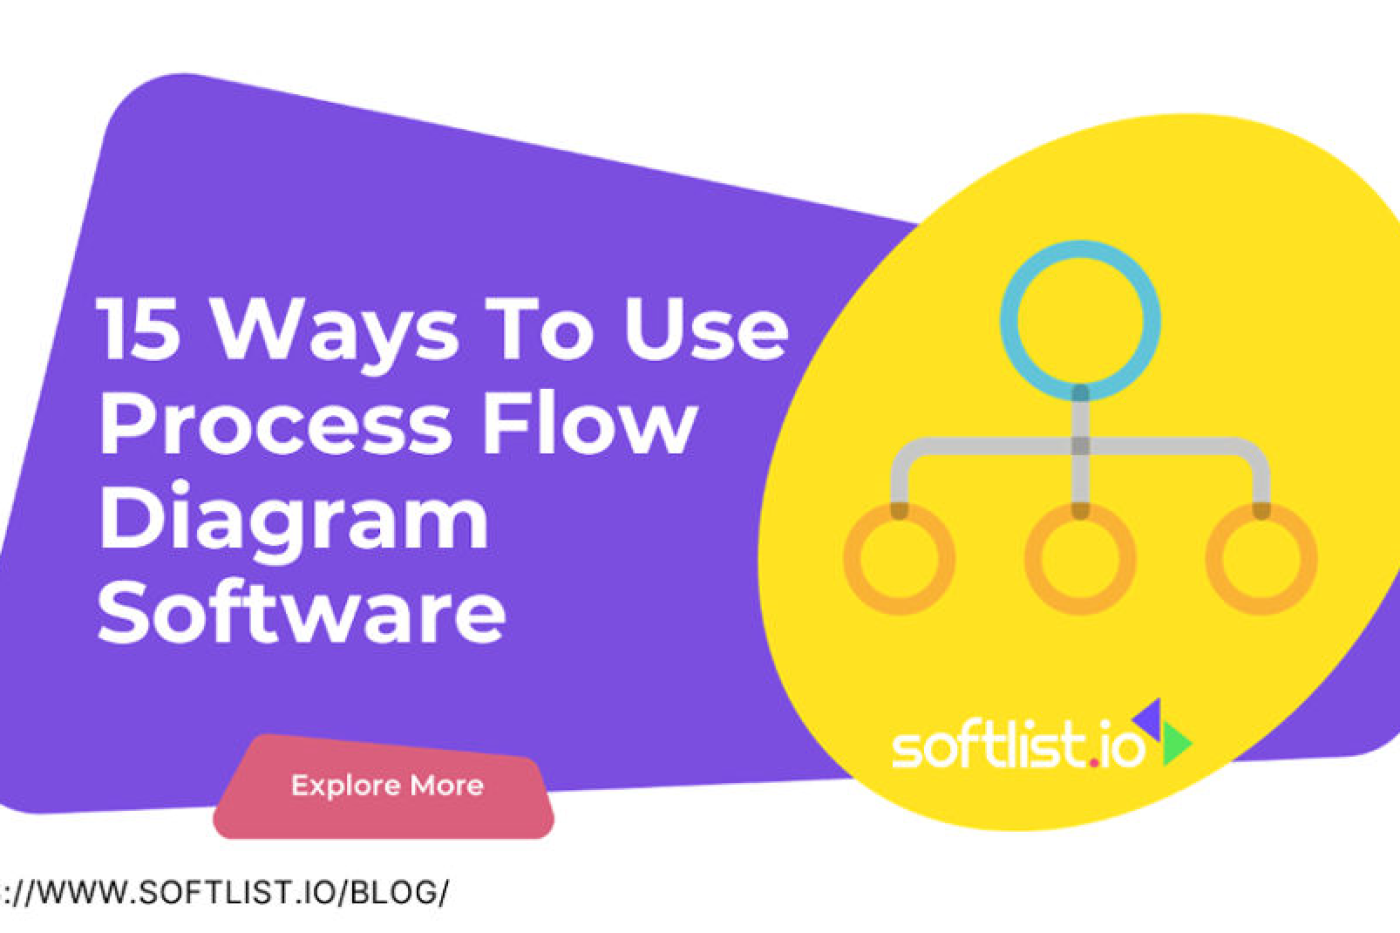 15 Ways To Use Process Flow Diagram Software